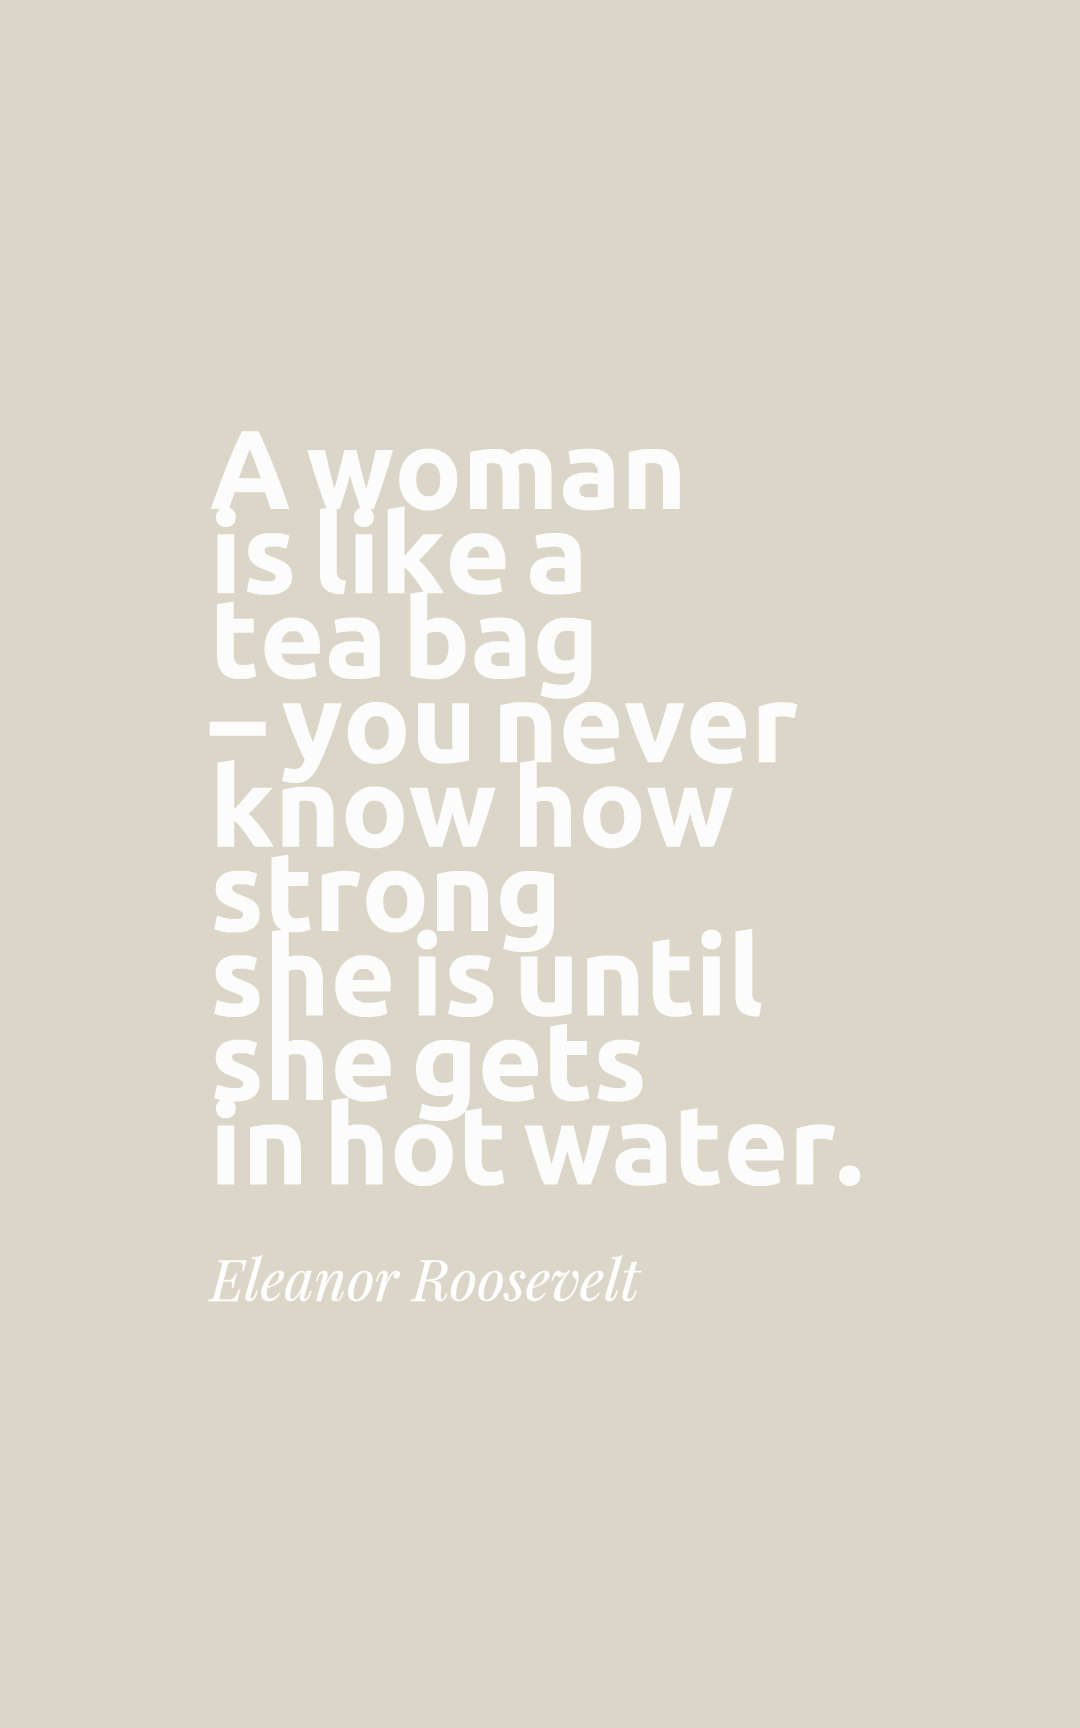 A woman is like a tea bag – you never know how strong she is until she gets in hot water.